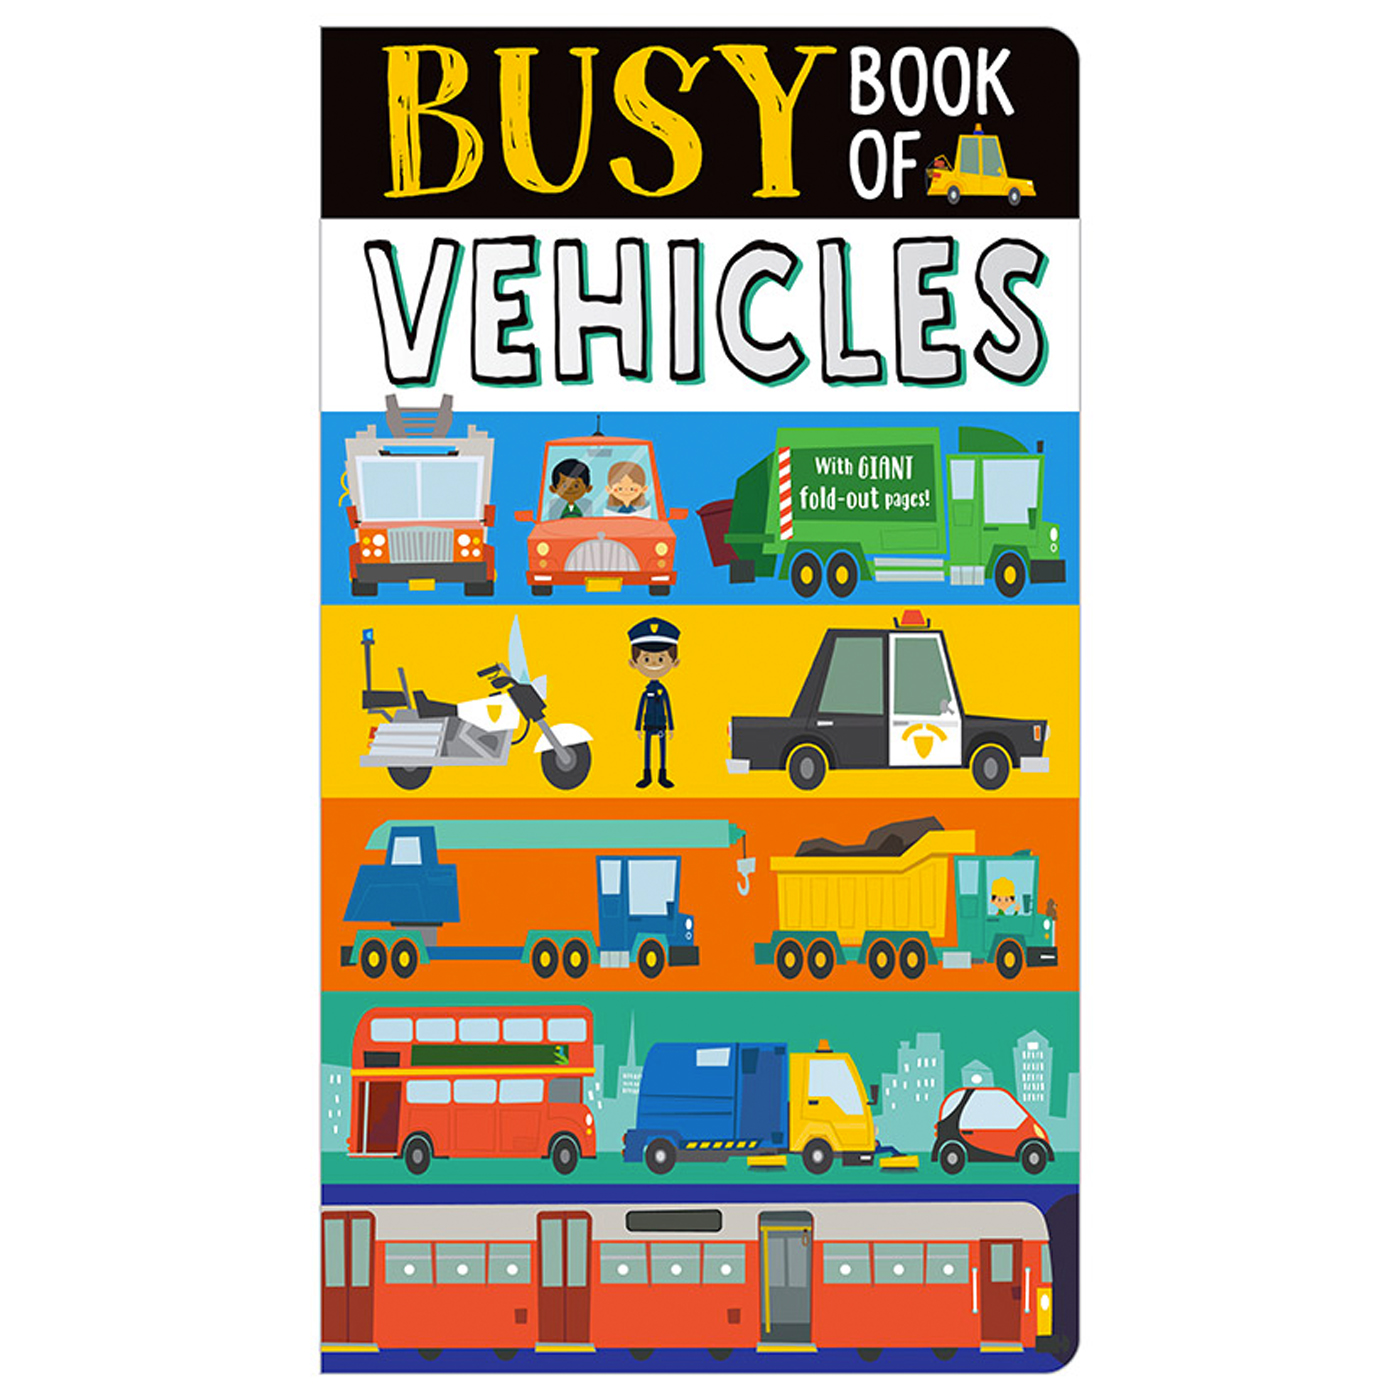  Busy Book of Vehicles